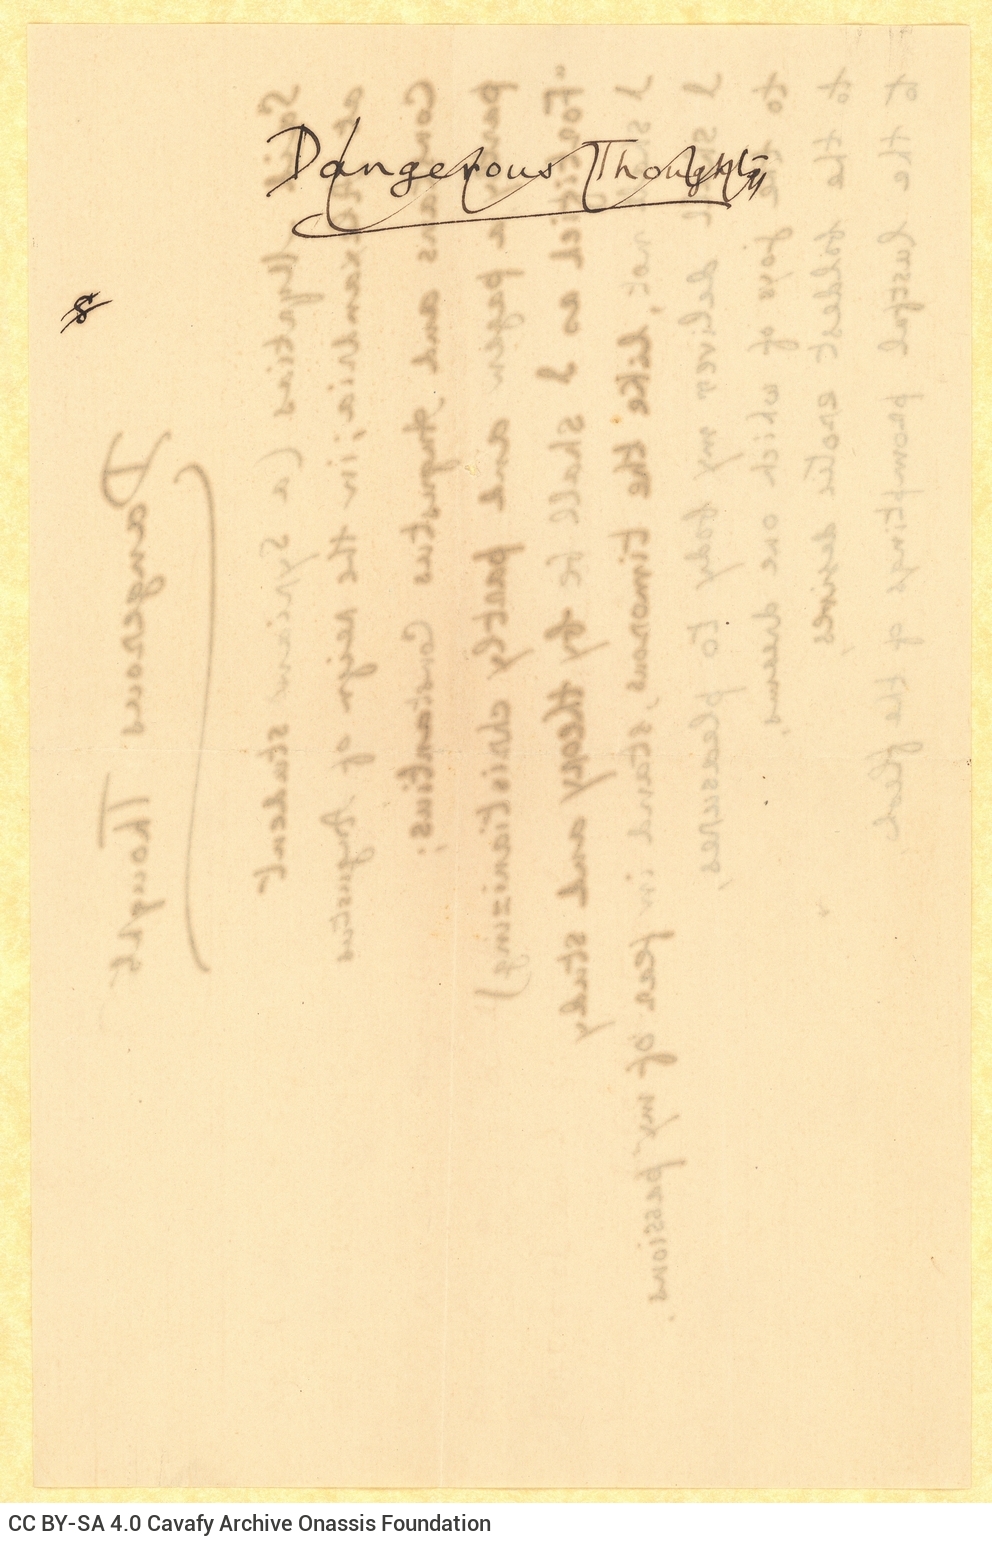 Handwritten English translation of the poem "Dangerous" by G. Valassopoulo on one side of a sheet. Cancellations and emend